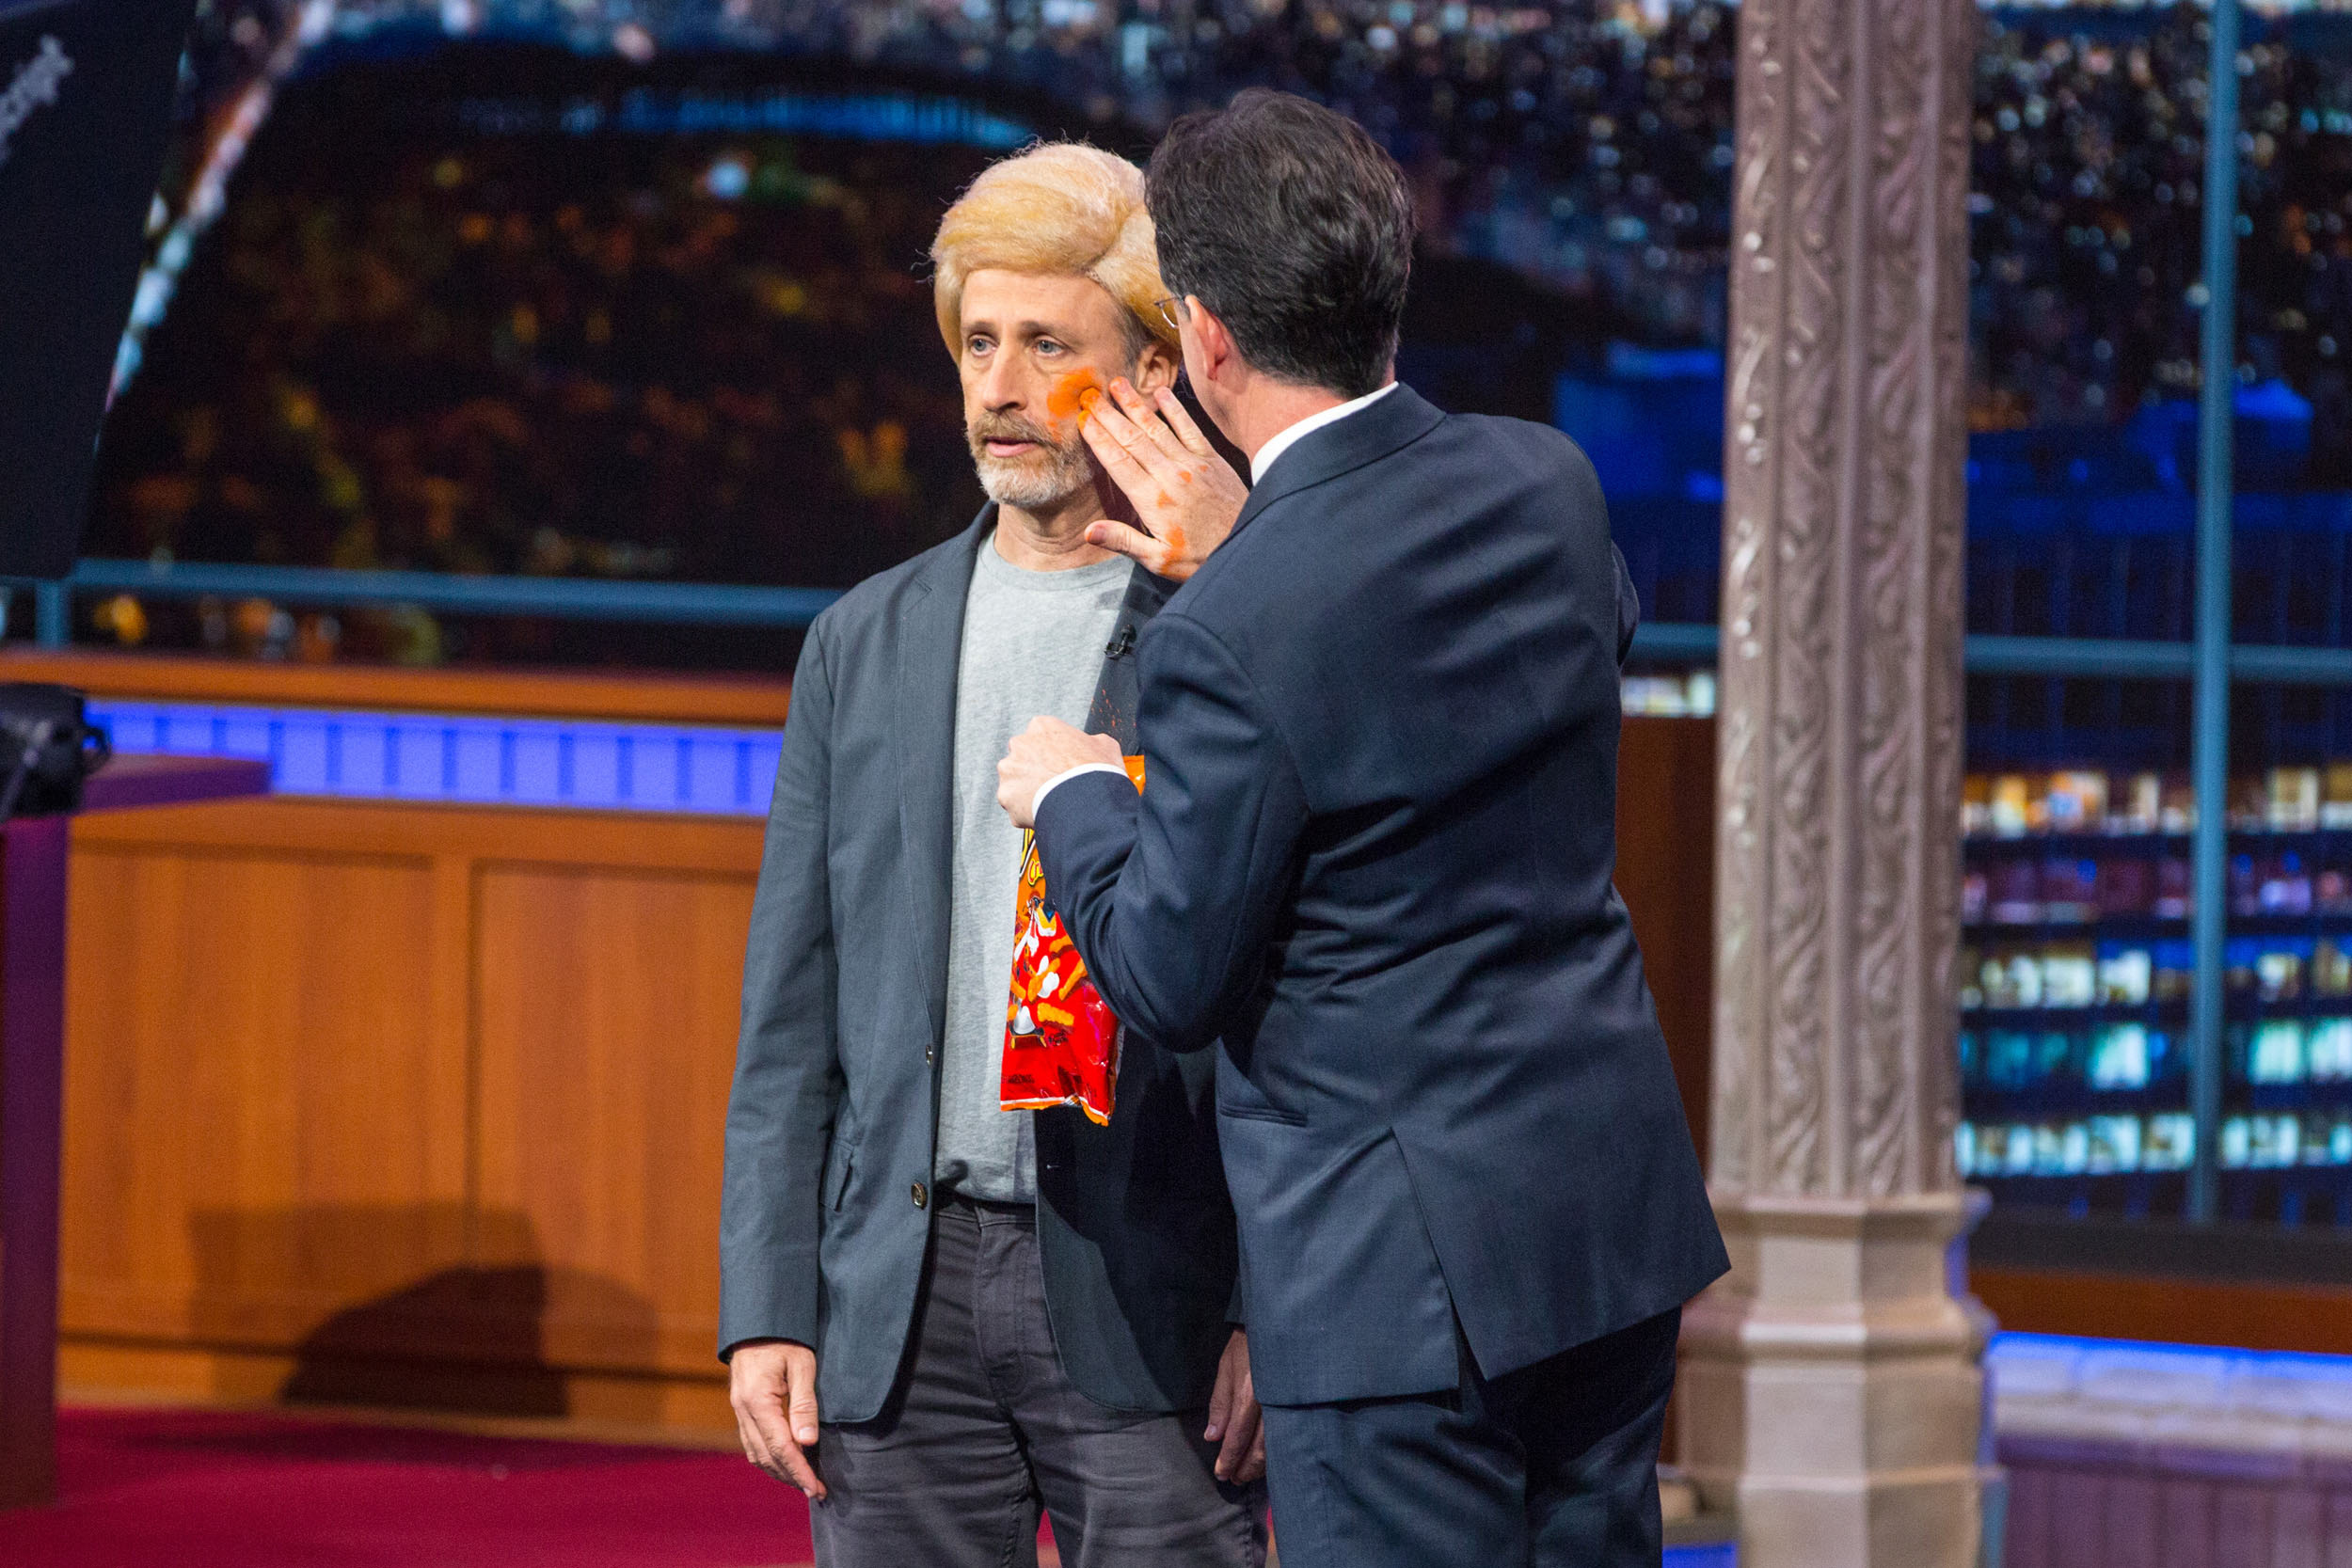 Jon Stewart dressed as Donald Trump on The Late Show with Stephen Colbert on Dec. 10, 2015.